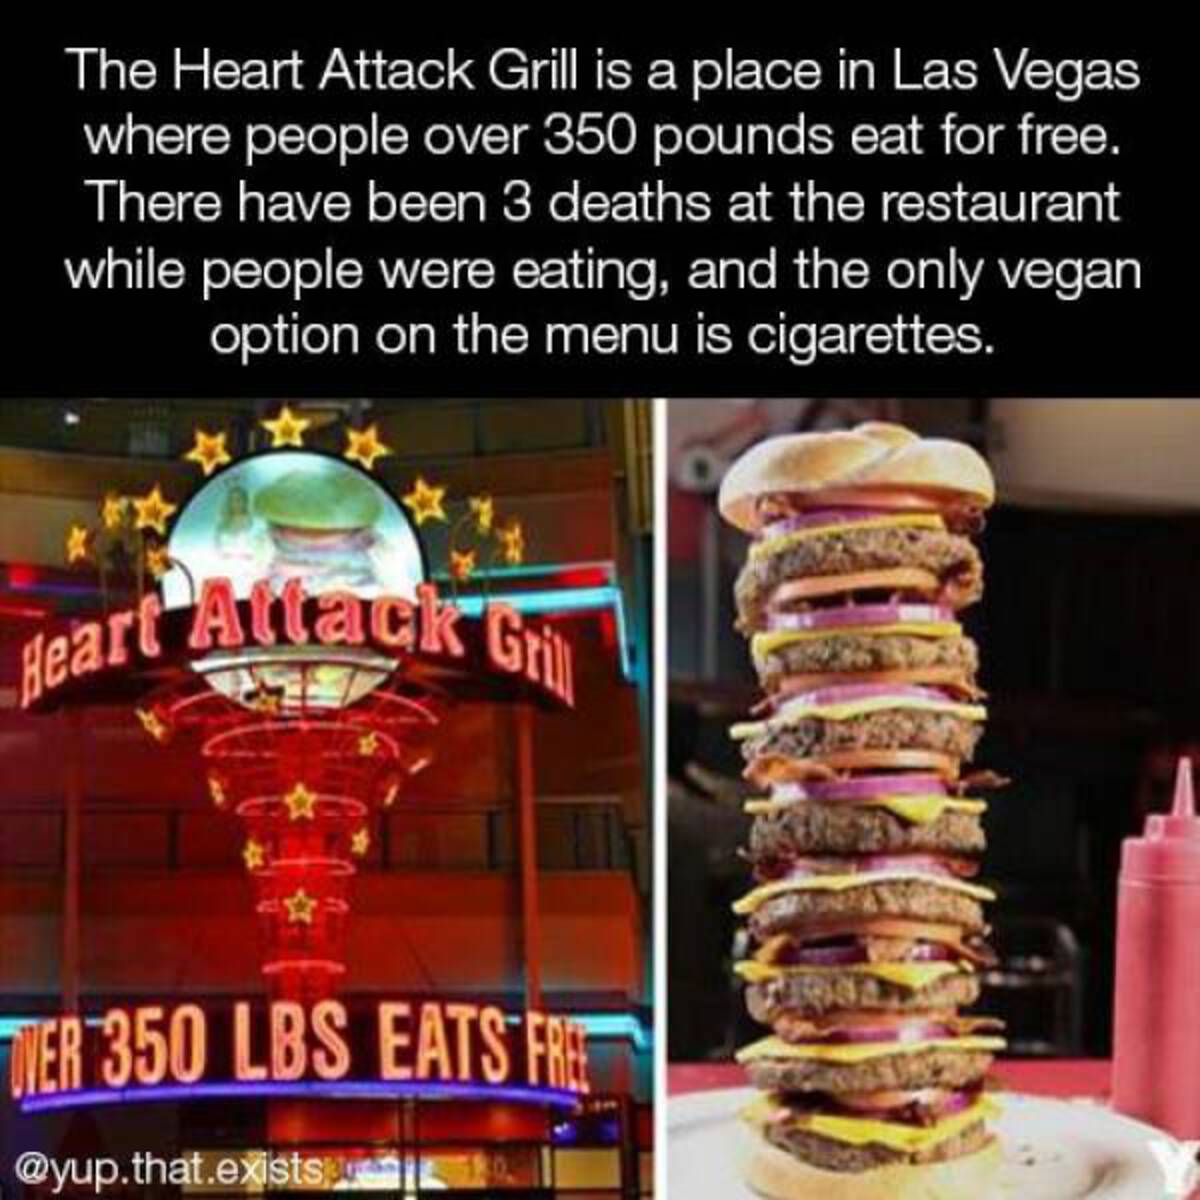 most unhealty food in the world - The Heart Attack Grill is a place in Las Vegas where people over 350 pounds eat for free. There have been 3 deaths at the restaurant while people were eating, and the only vegan option on the menu is cigarettes. Heart Att